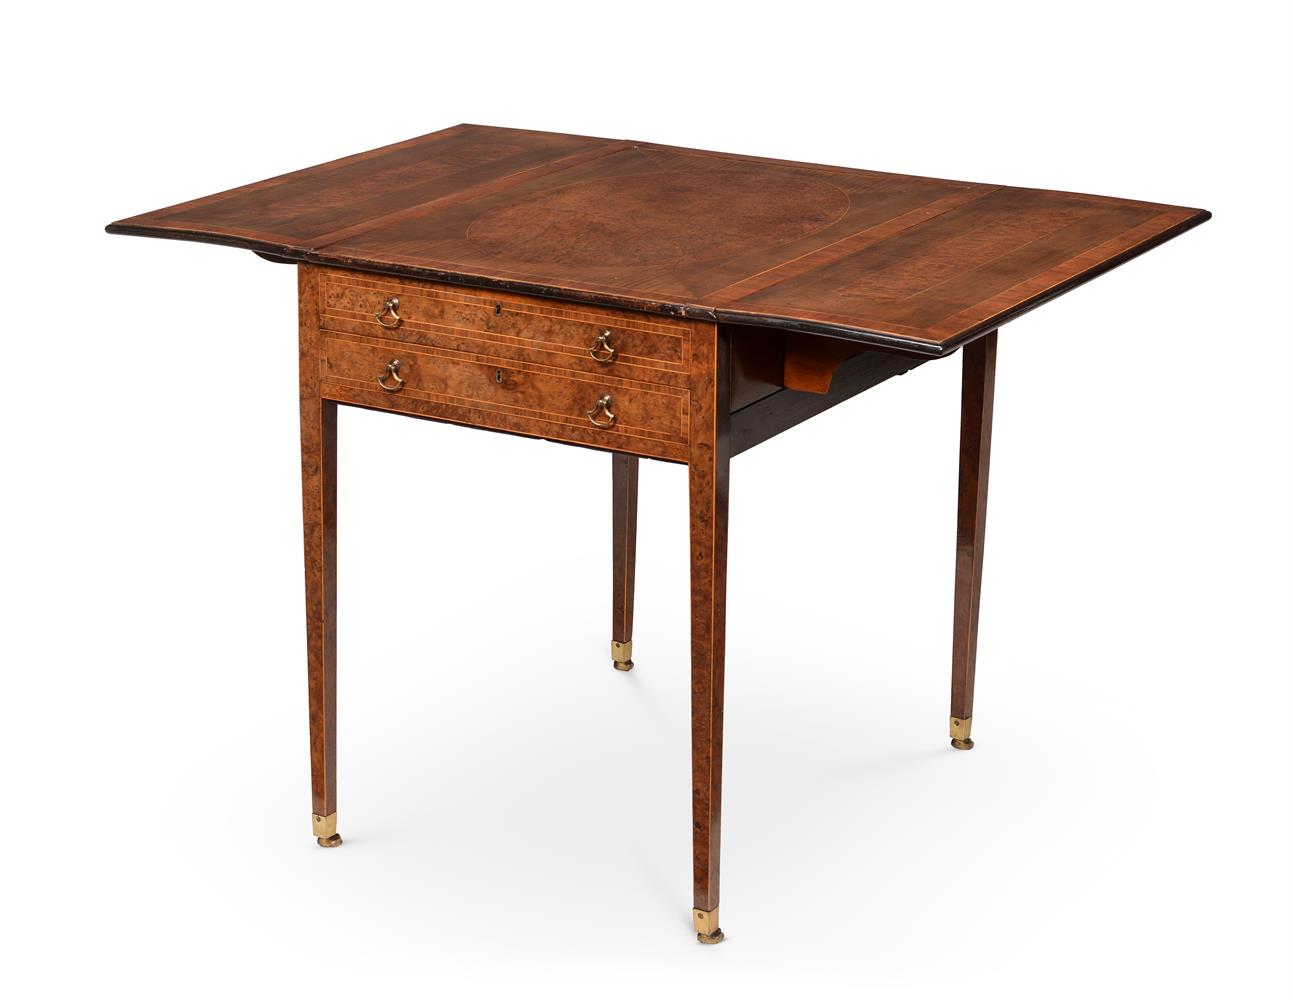 Y A GEORGE III BURR YEW AND HAREWOOD 'HARLEQUIN' PEMBROKE TABLE, ATTRIBUTED TO INCE & MAYHEW - Image 6 of 6